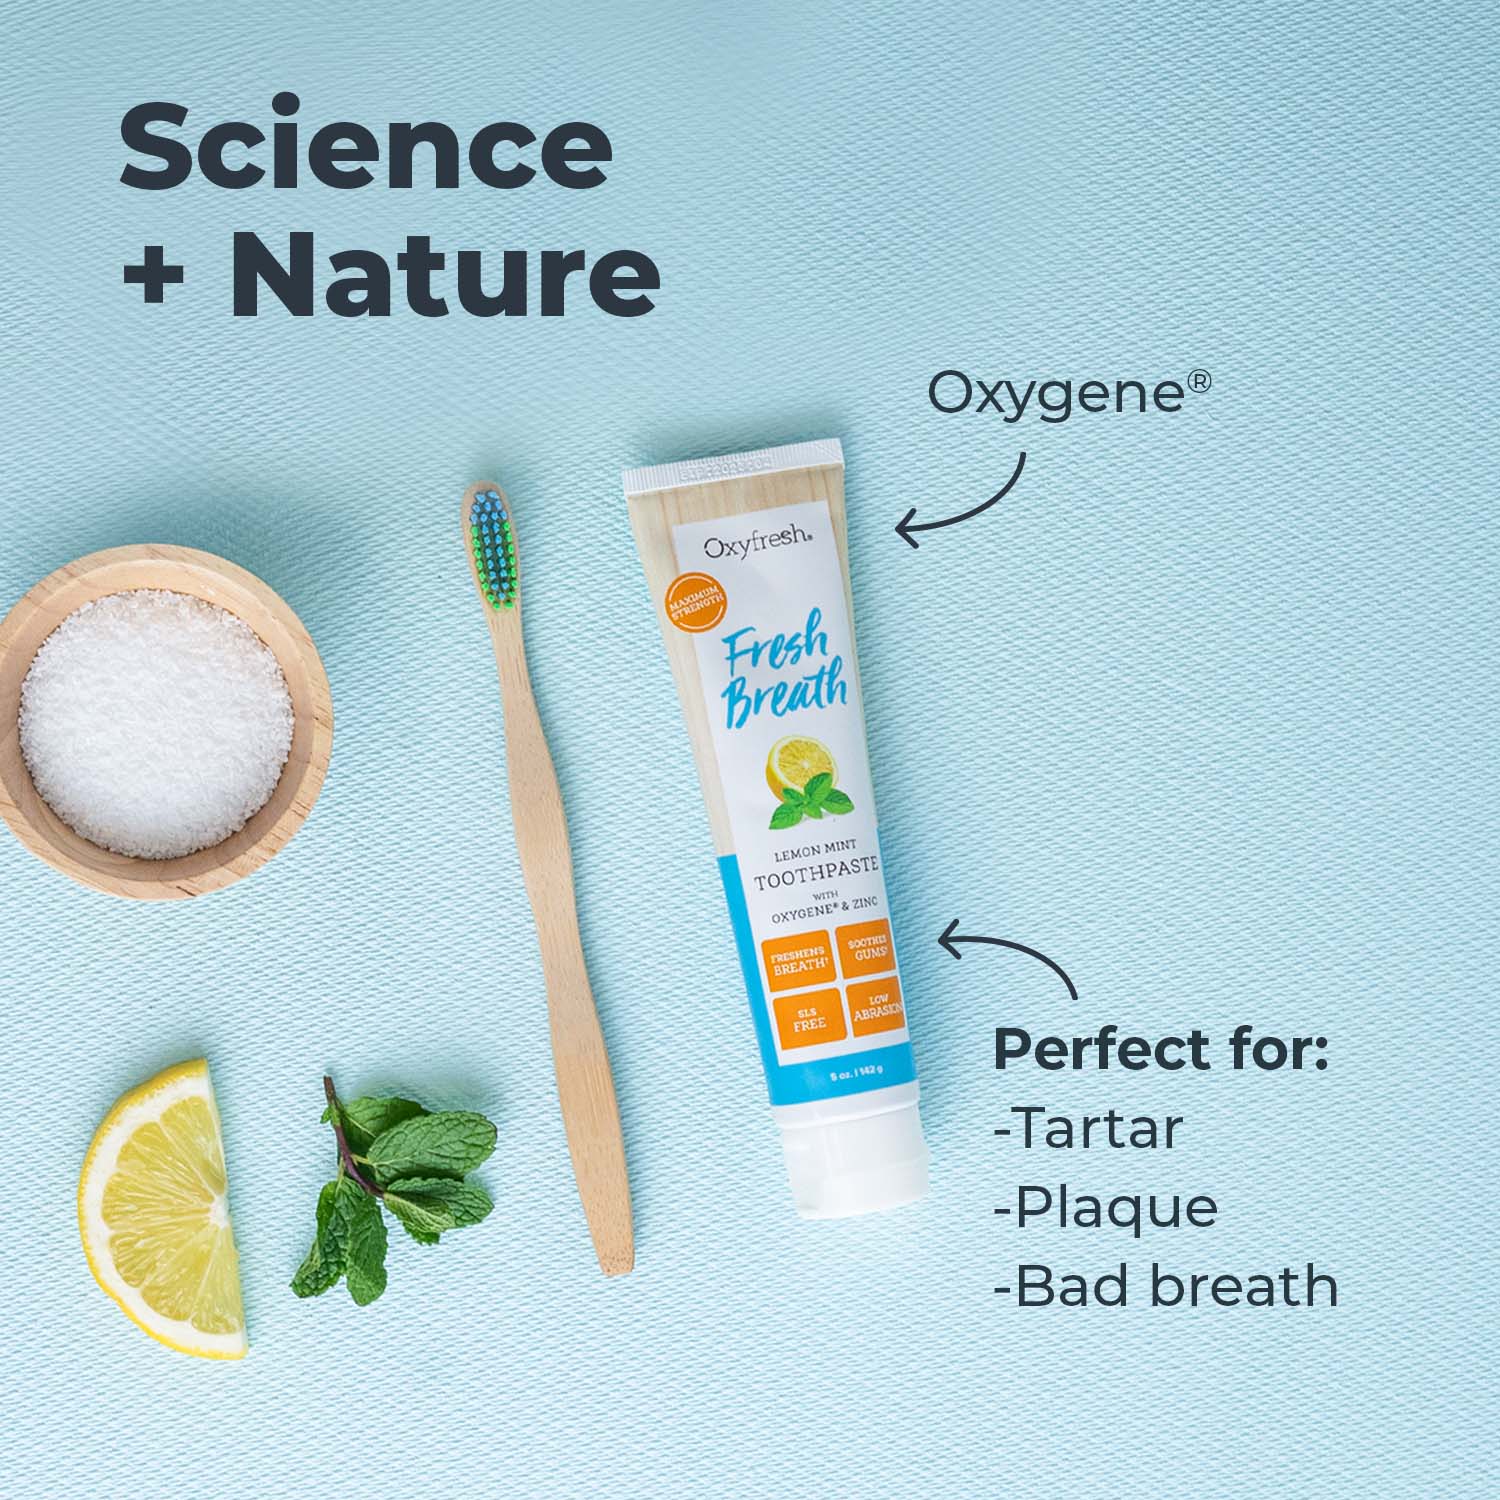 oxyfresh-fresh-breath-lemon-mint-toothpaste-science-and-nature-perfect-for-tartar-plaque-and-bad-breath